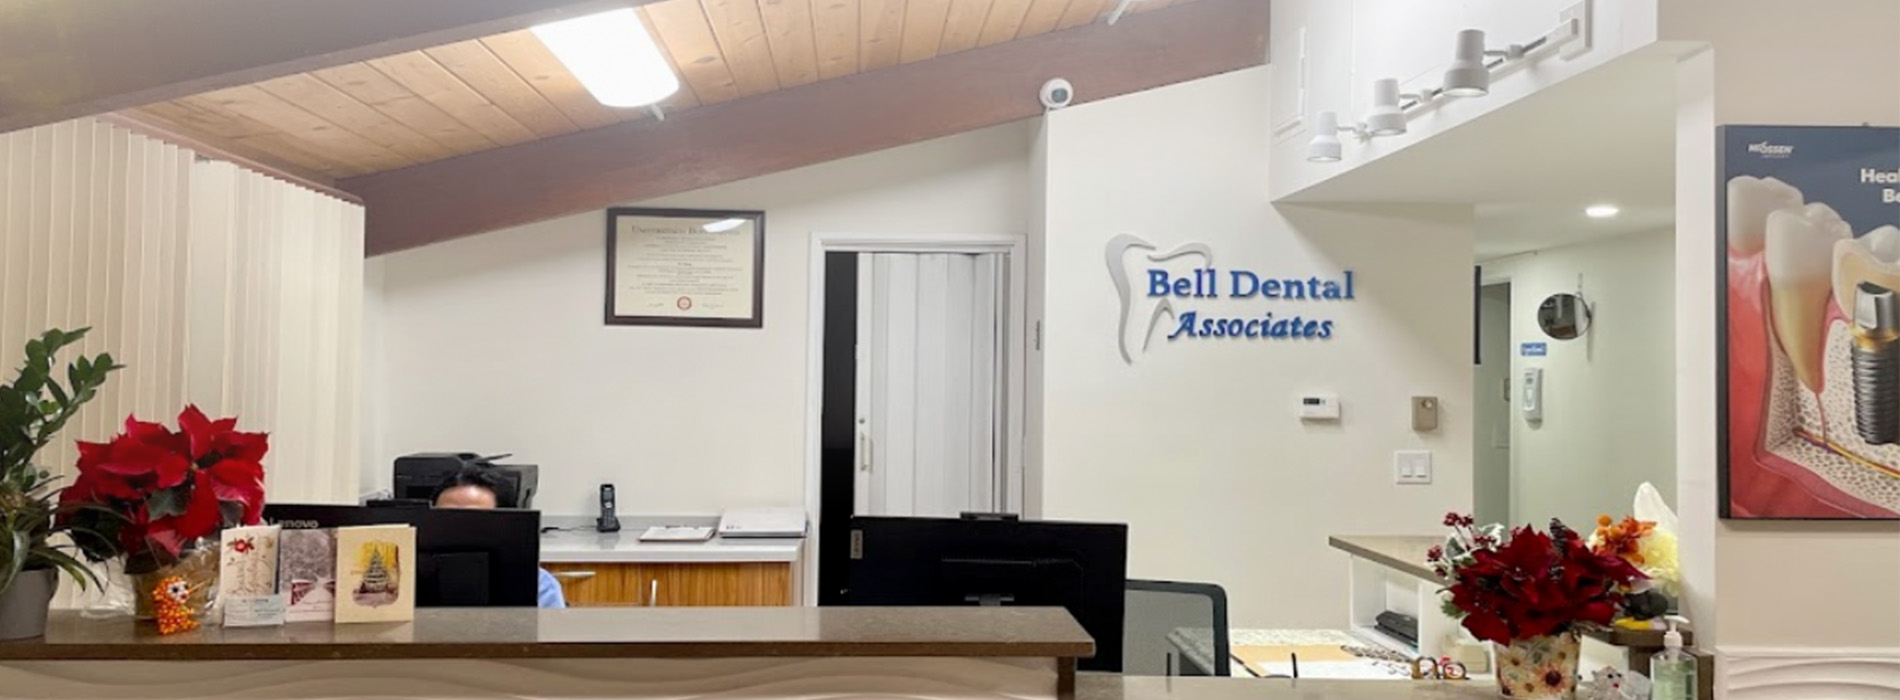 Bell Dental Associates | TMJ Disorders, Extractions and Dental Fillings